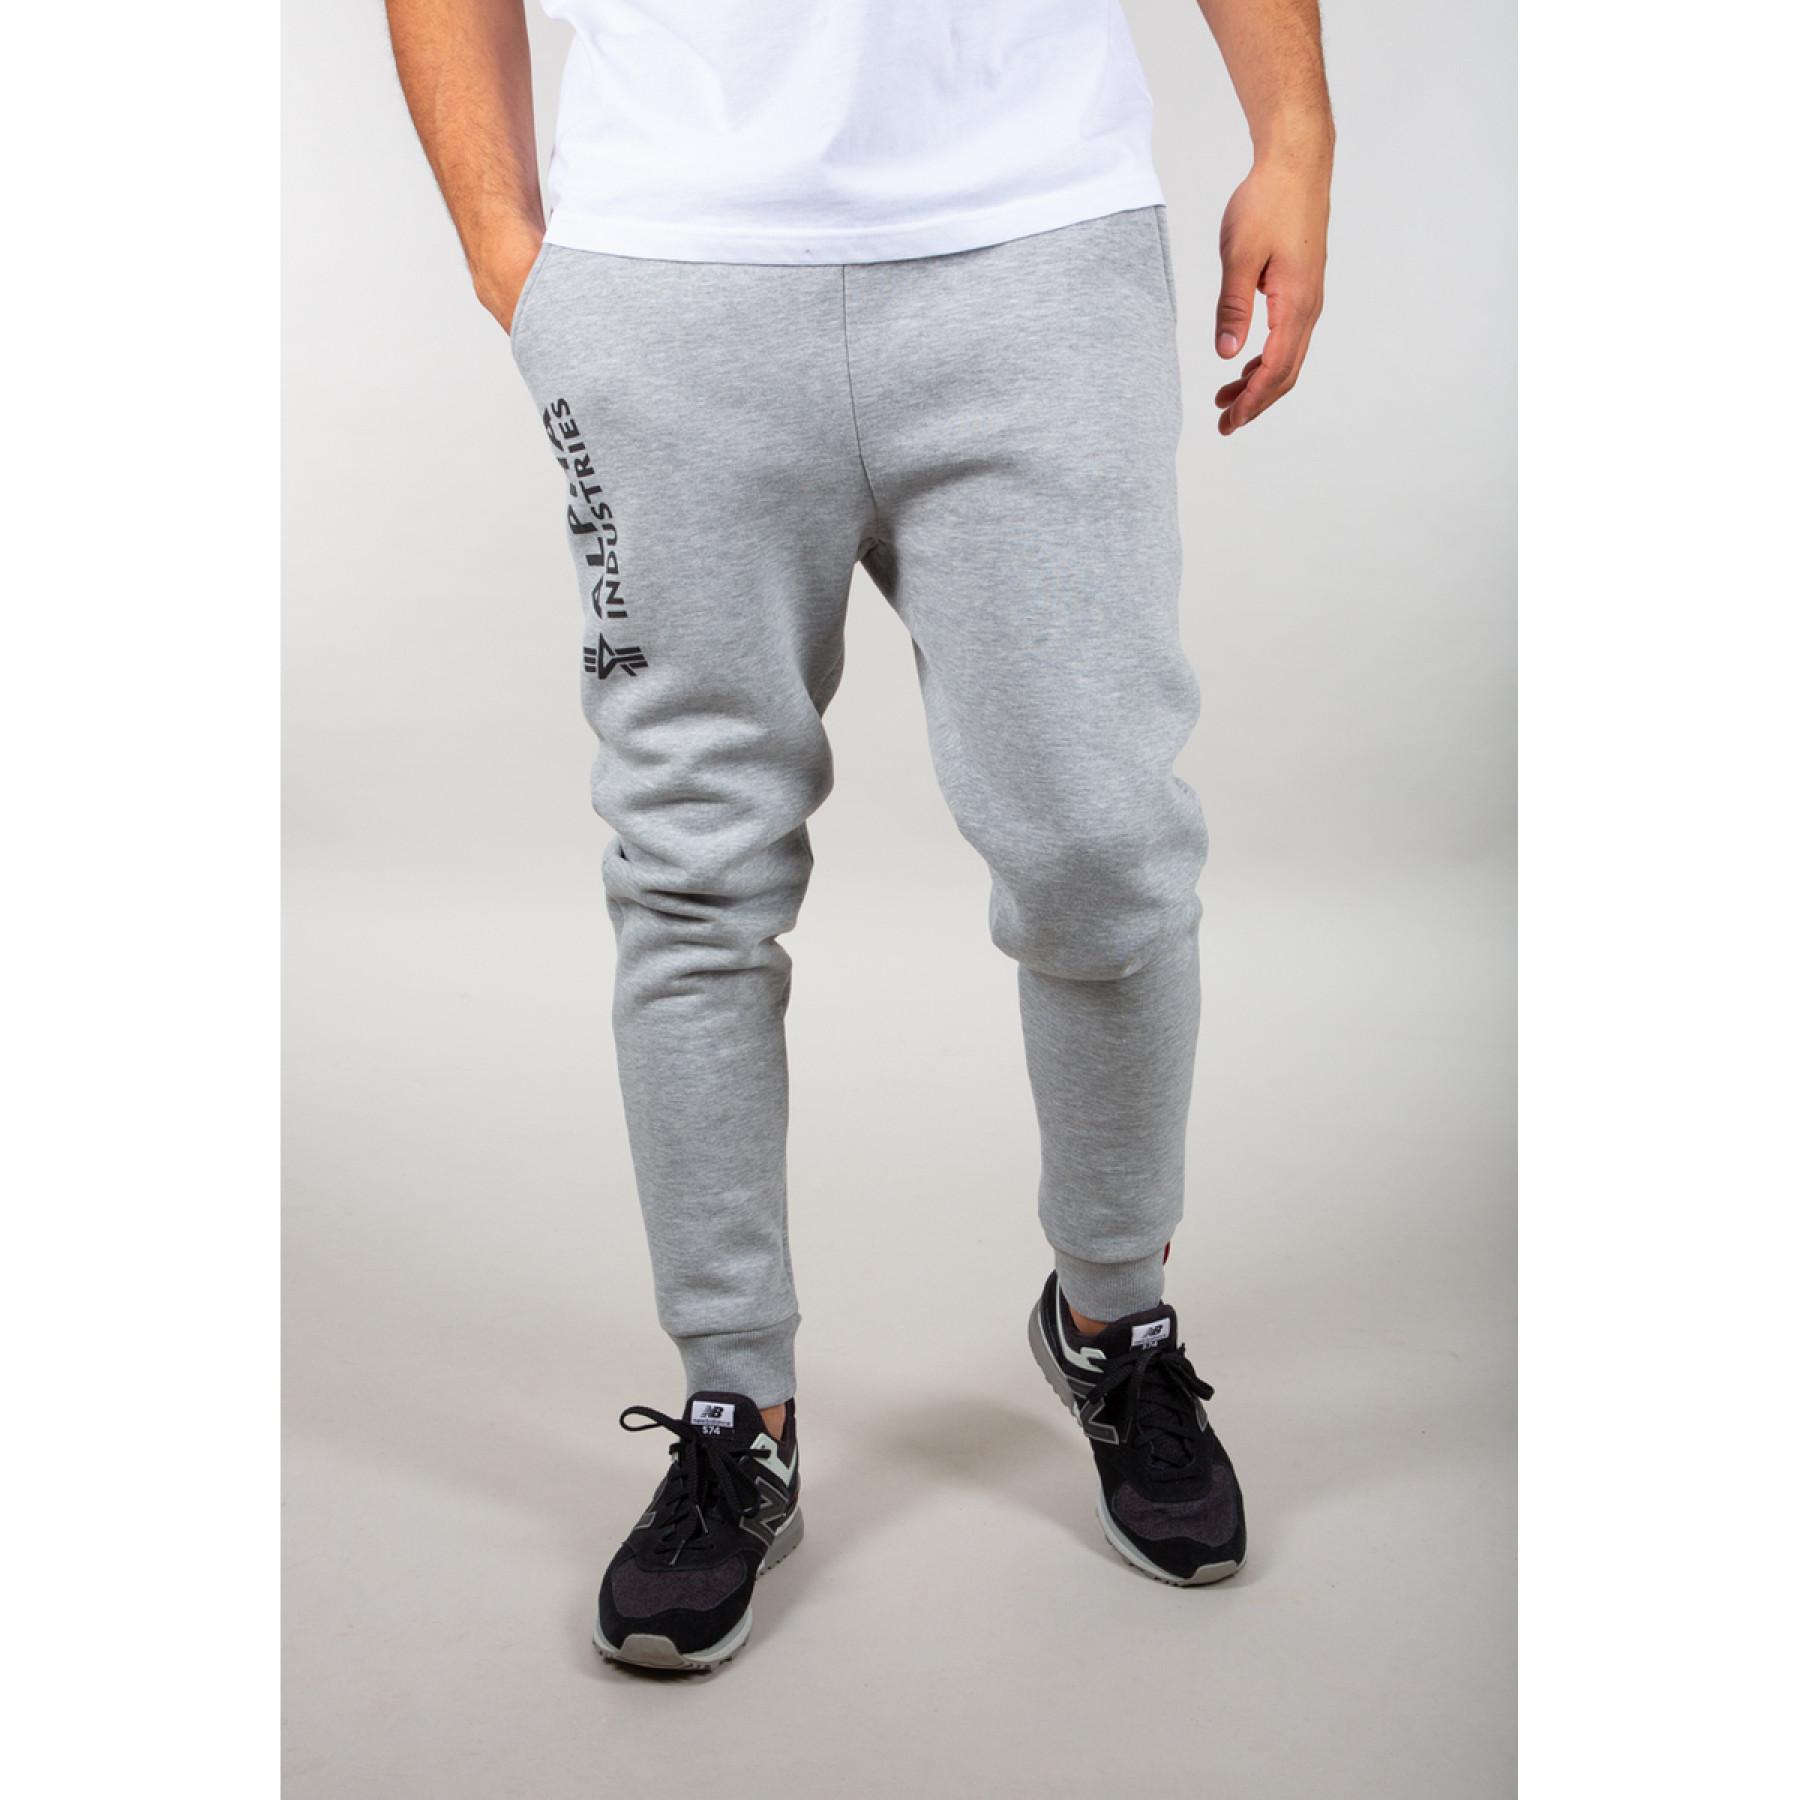 Jogging pants Basic Lifestyle Alpha AI Others - - Brands - Industries